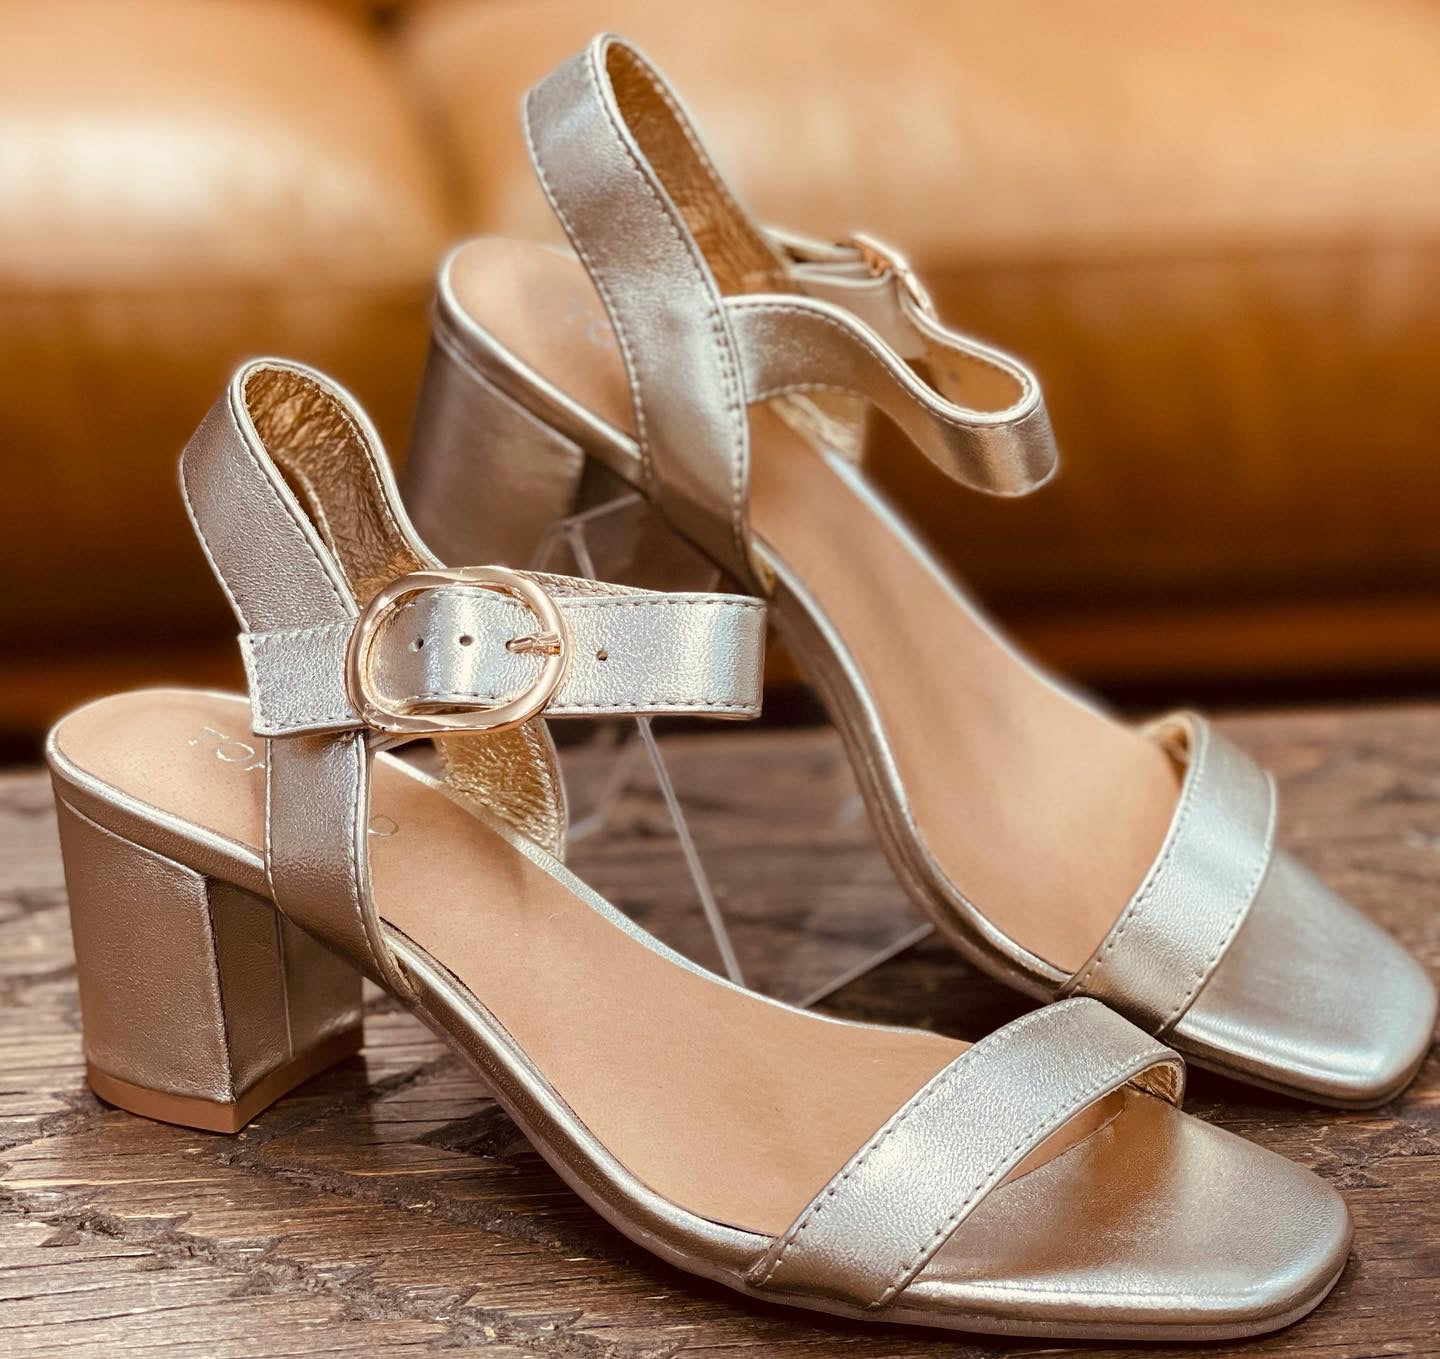 Top End Geonn-To Pale Gold Heel